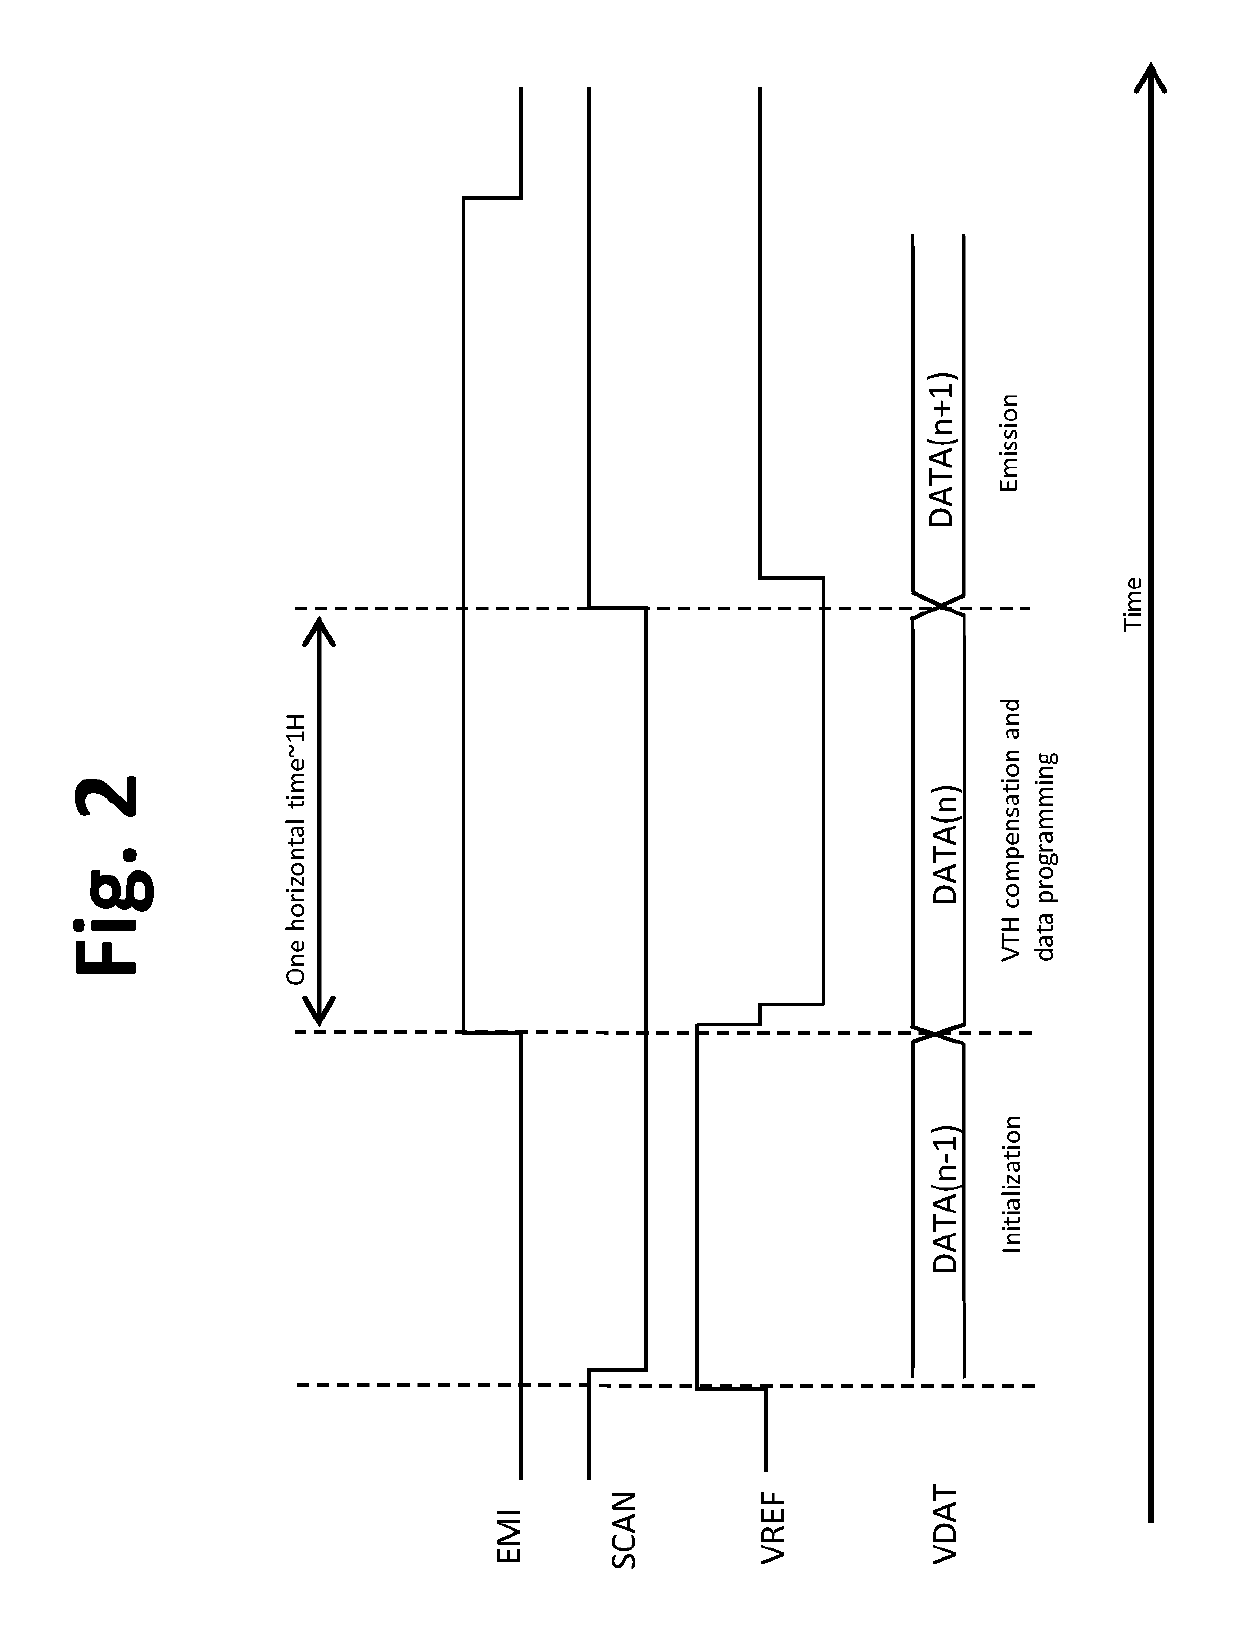 TFT pixel threshold voltage compensation circuit with data voltage applied at light-emitting device